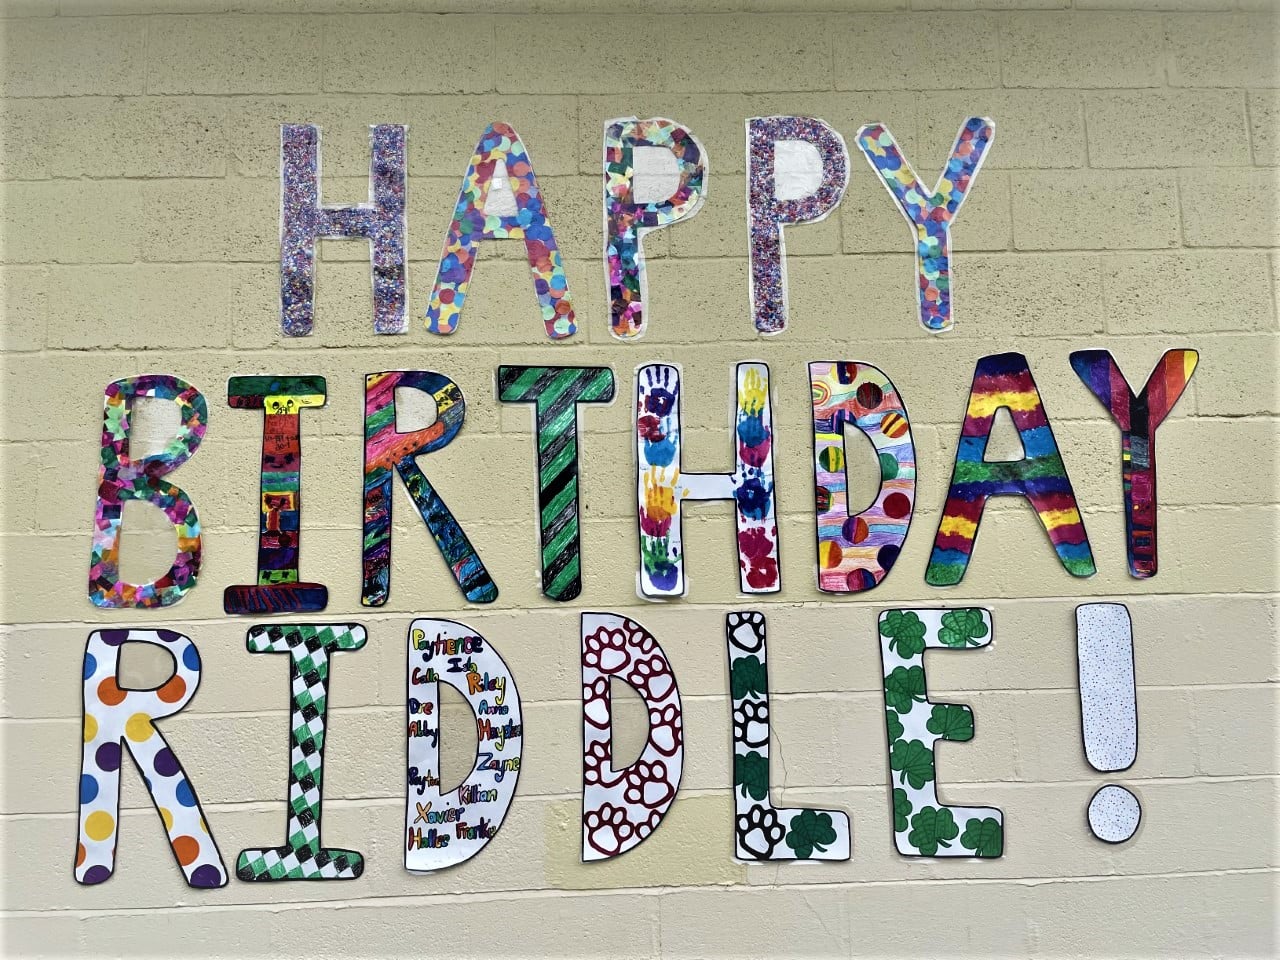 Happy Birthday Riddle artwork by K-2 students.